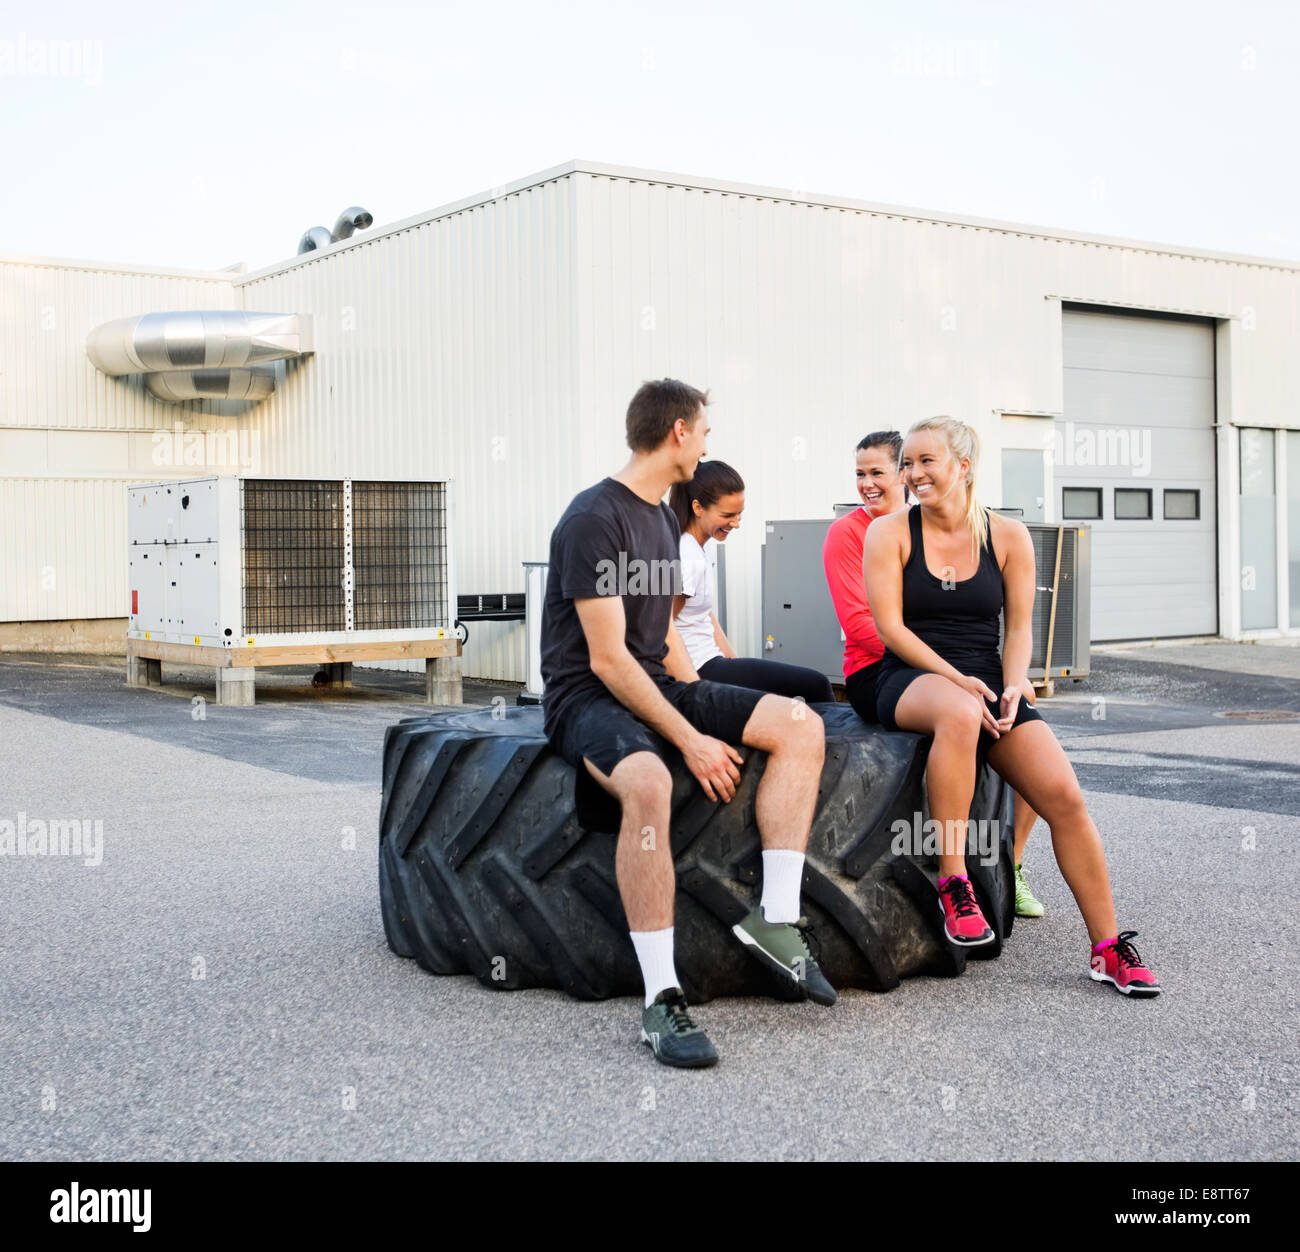 Fit Friends Conversing While Relaxing On Tire Stock Photo